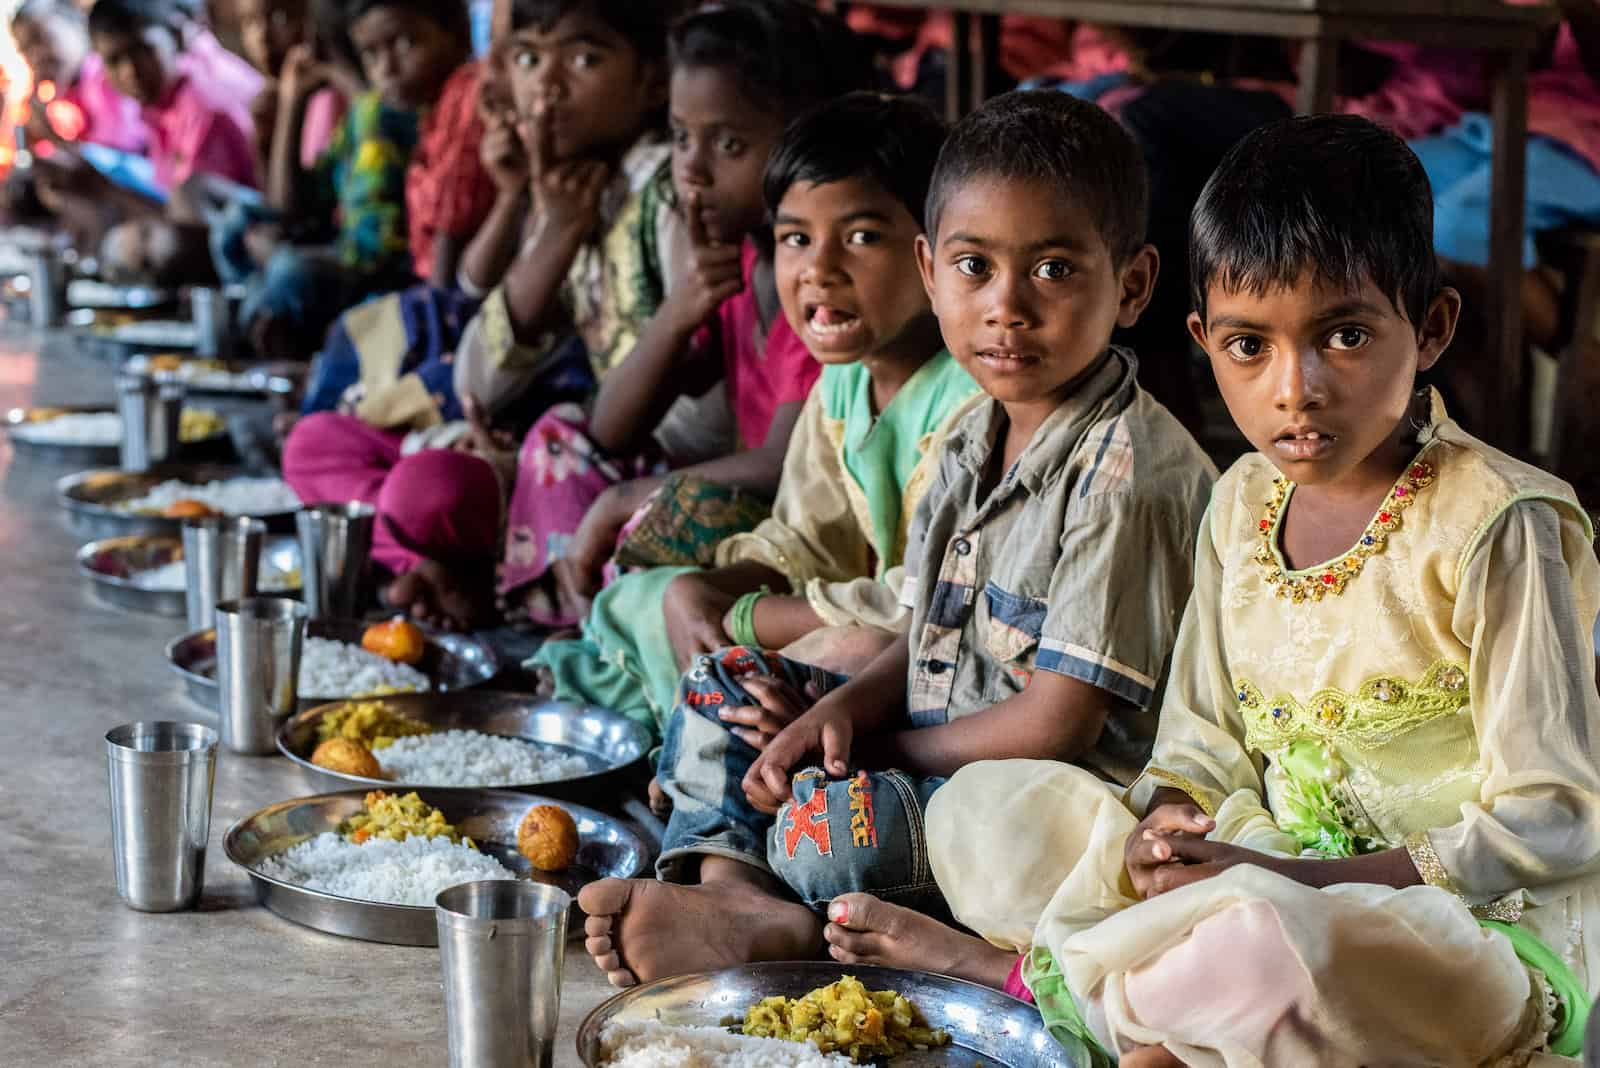 A group of children sit on the floor in a line, eating plates of rice. Report: Hunger Is on the Rise in the World